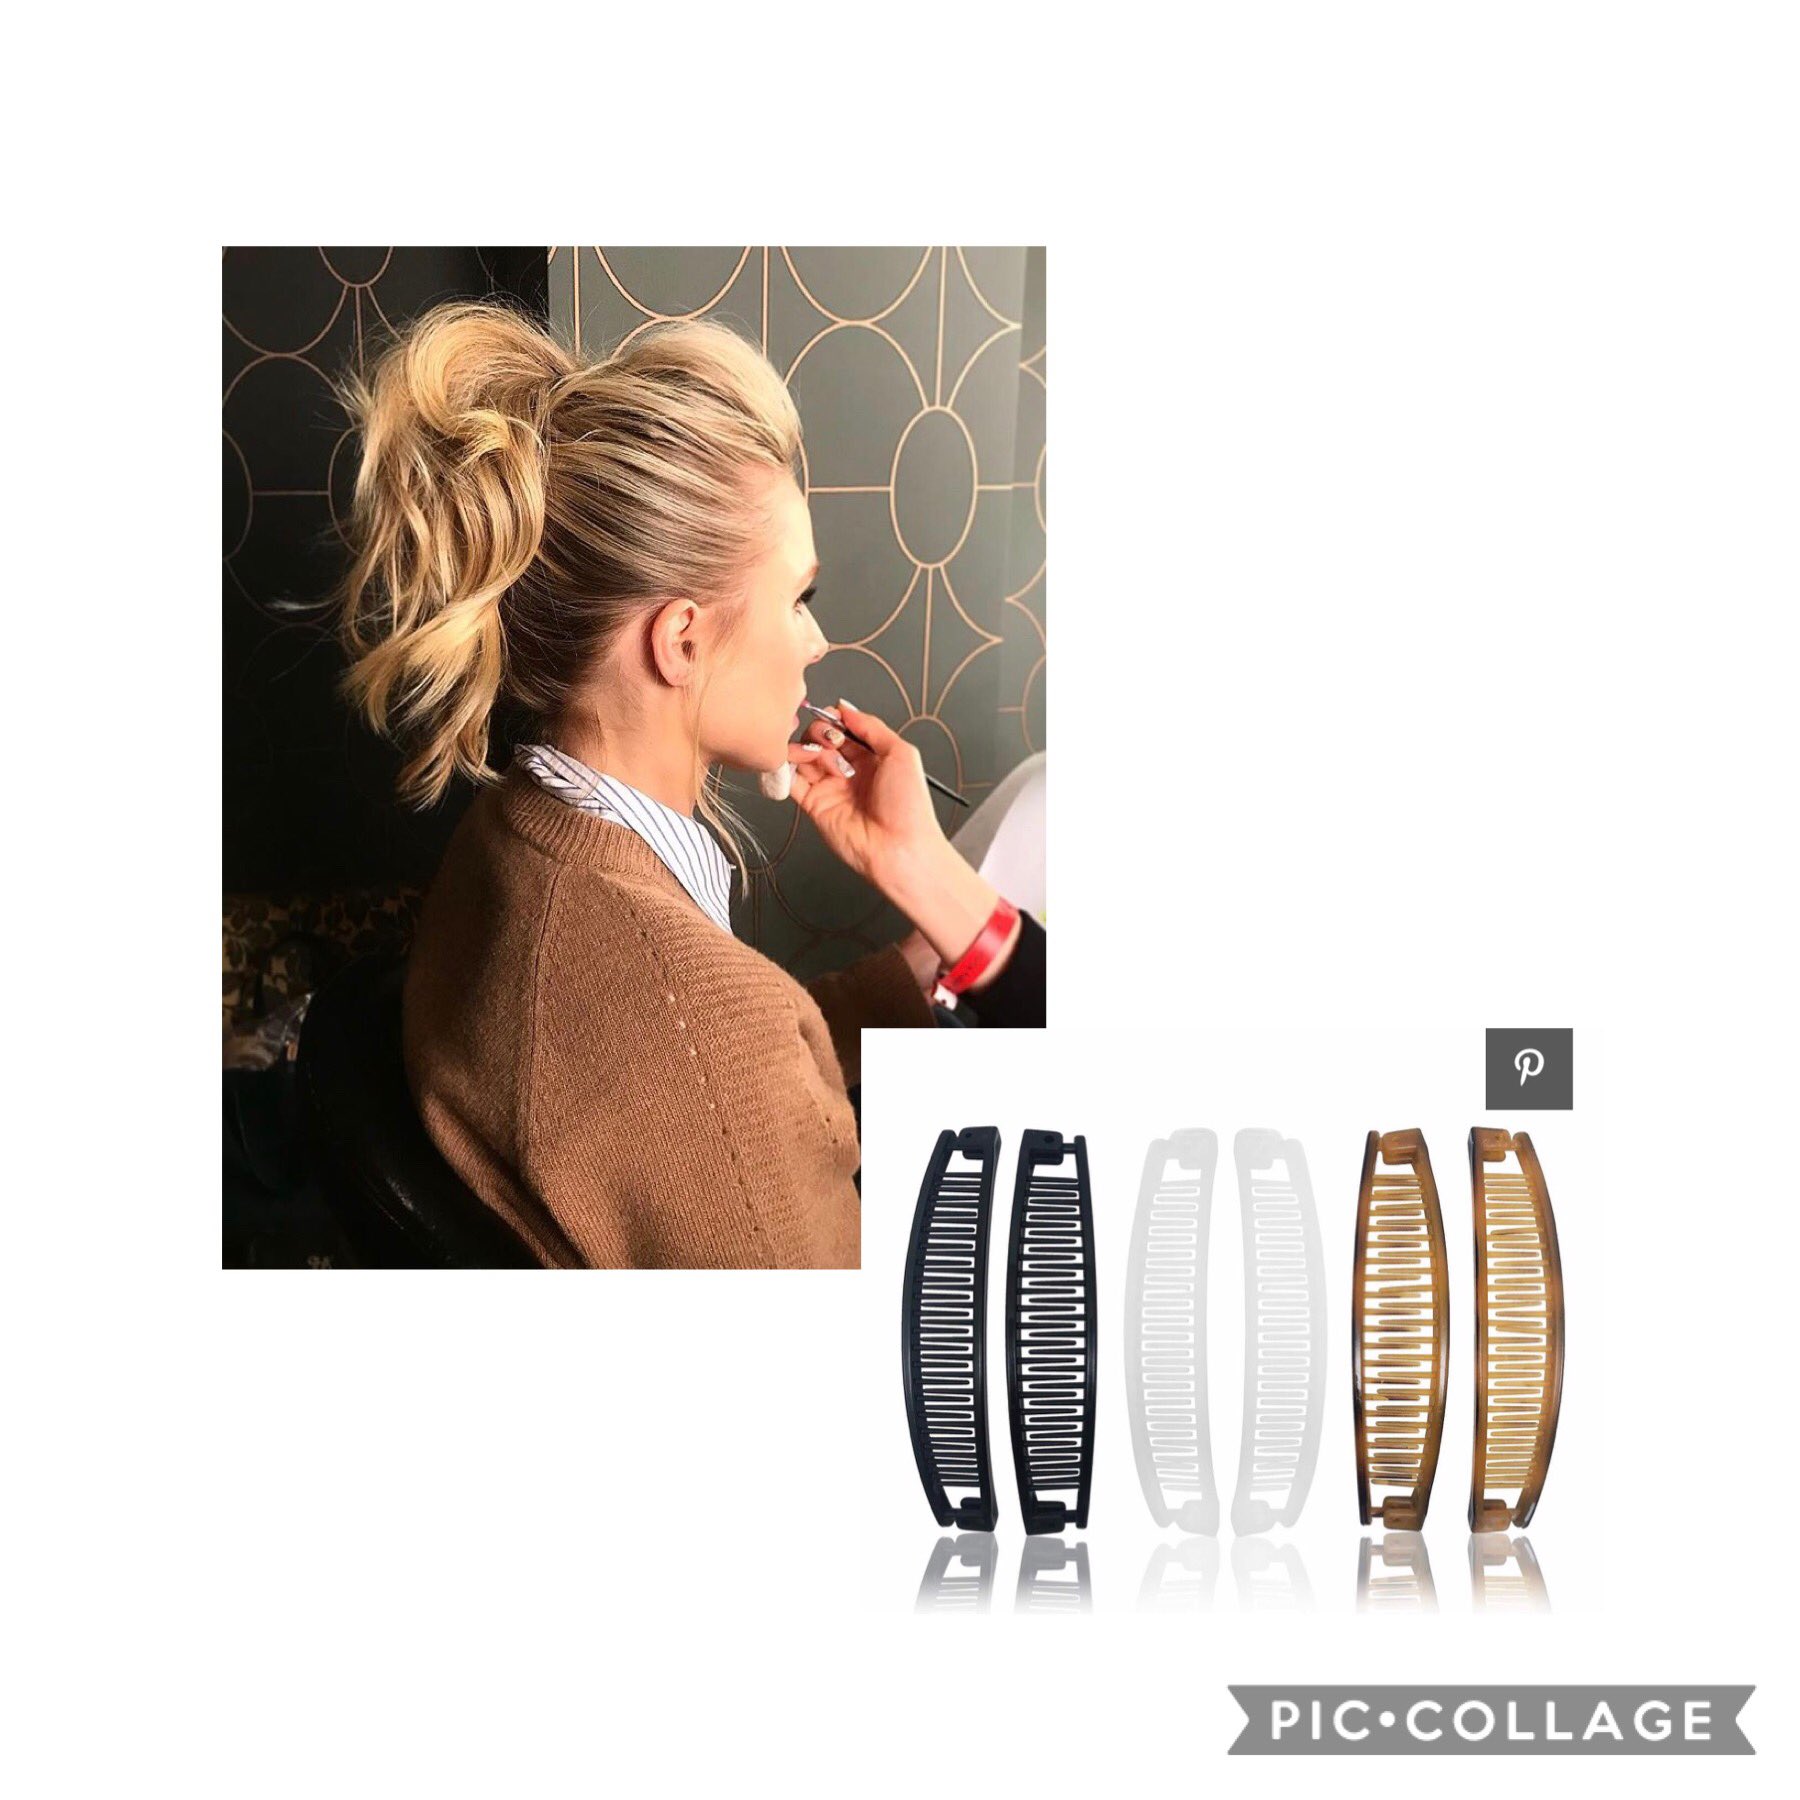 Angie Poirier on X: OMG LADIES.. the 1980s Banana Clip is BACK! This is a  fashion comeback I support. 👍 I loved my banana clips! All about the dry  shampoo/messy pony like @